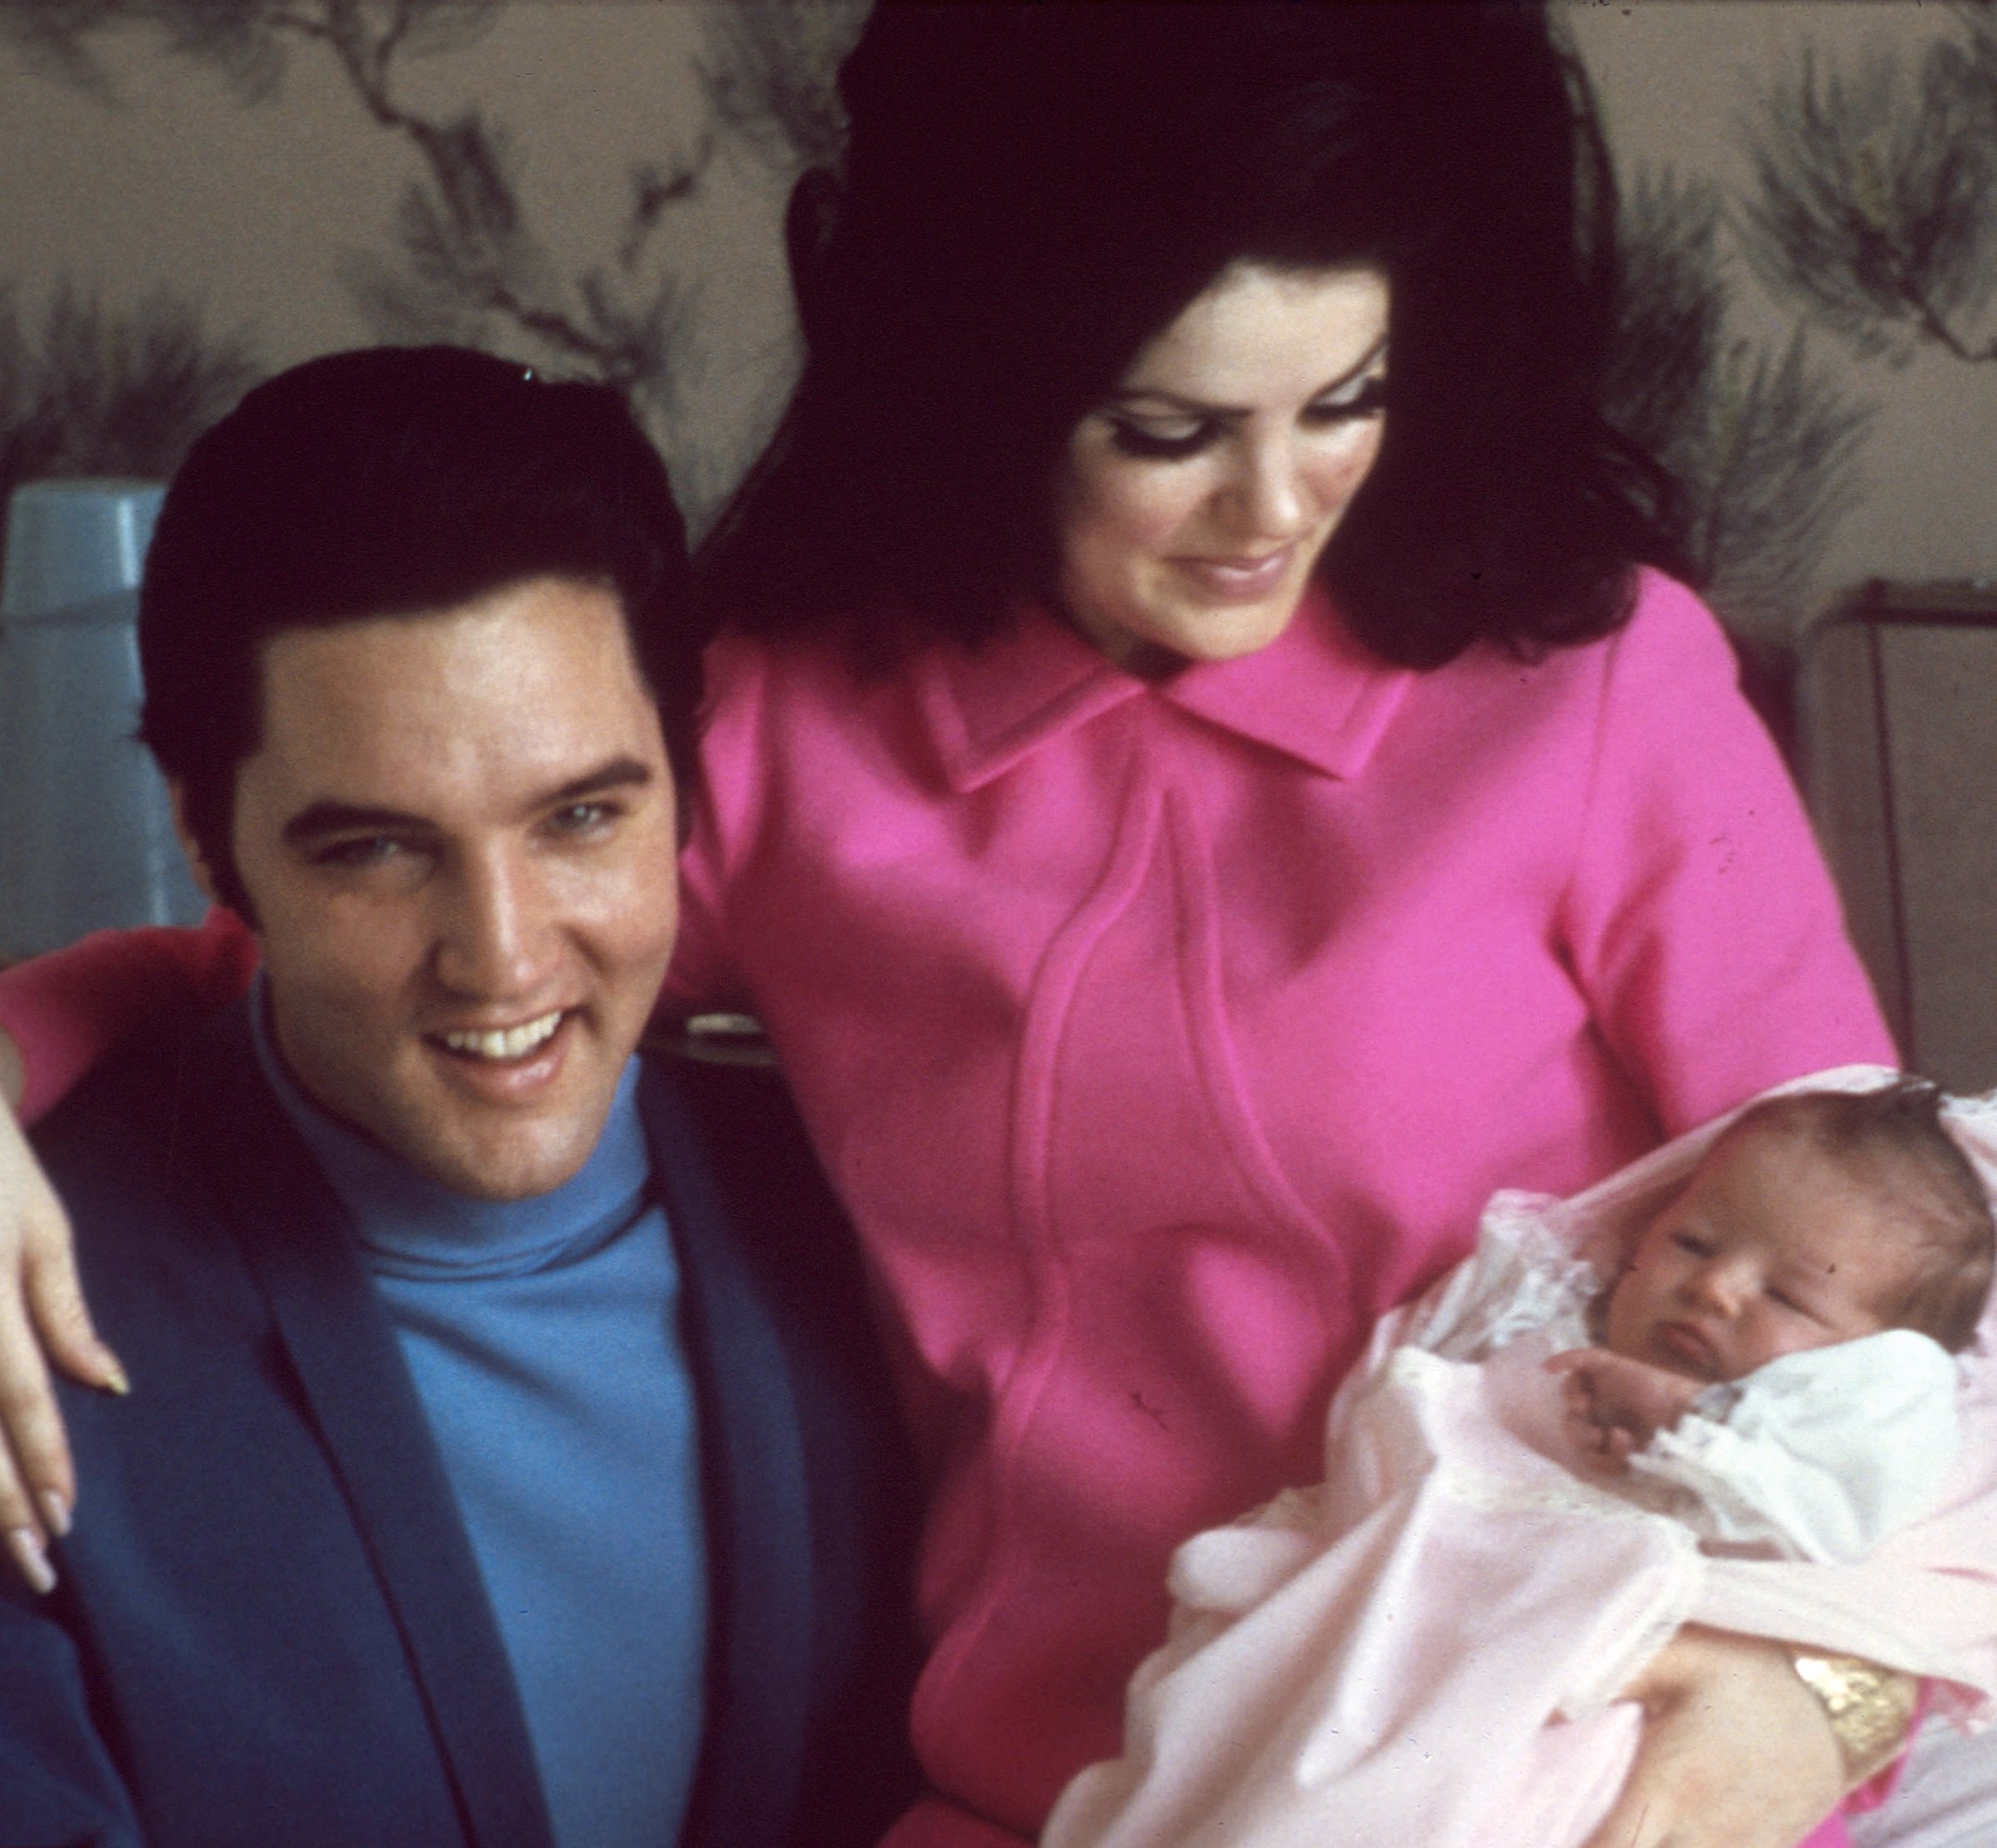 Elvis Presley with his wife, Priscilla Presley, and their daughter